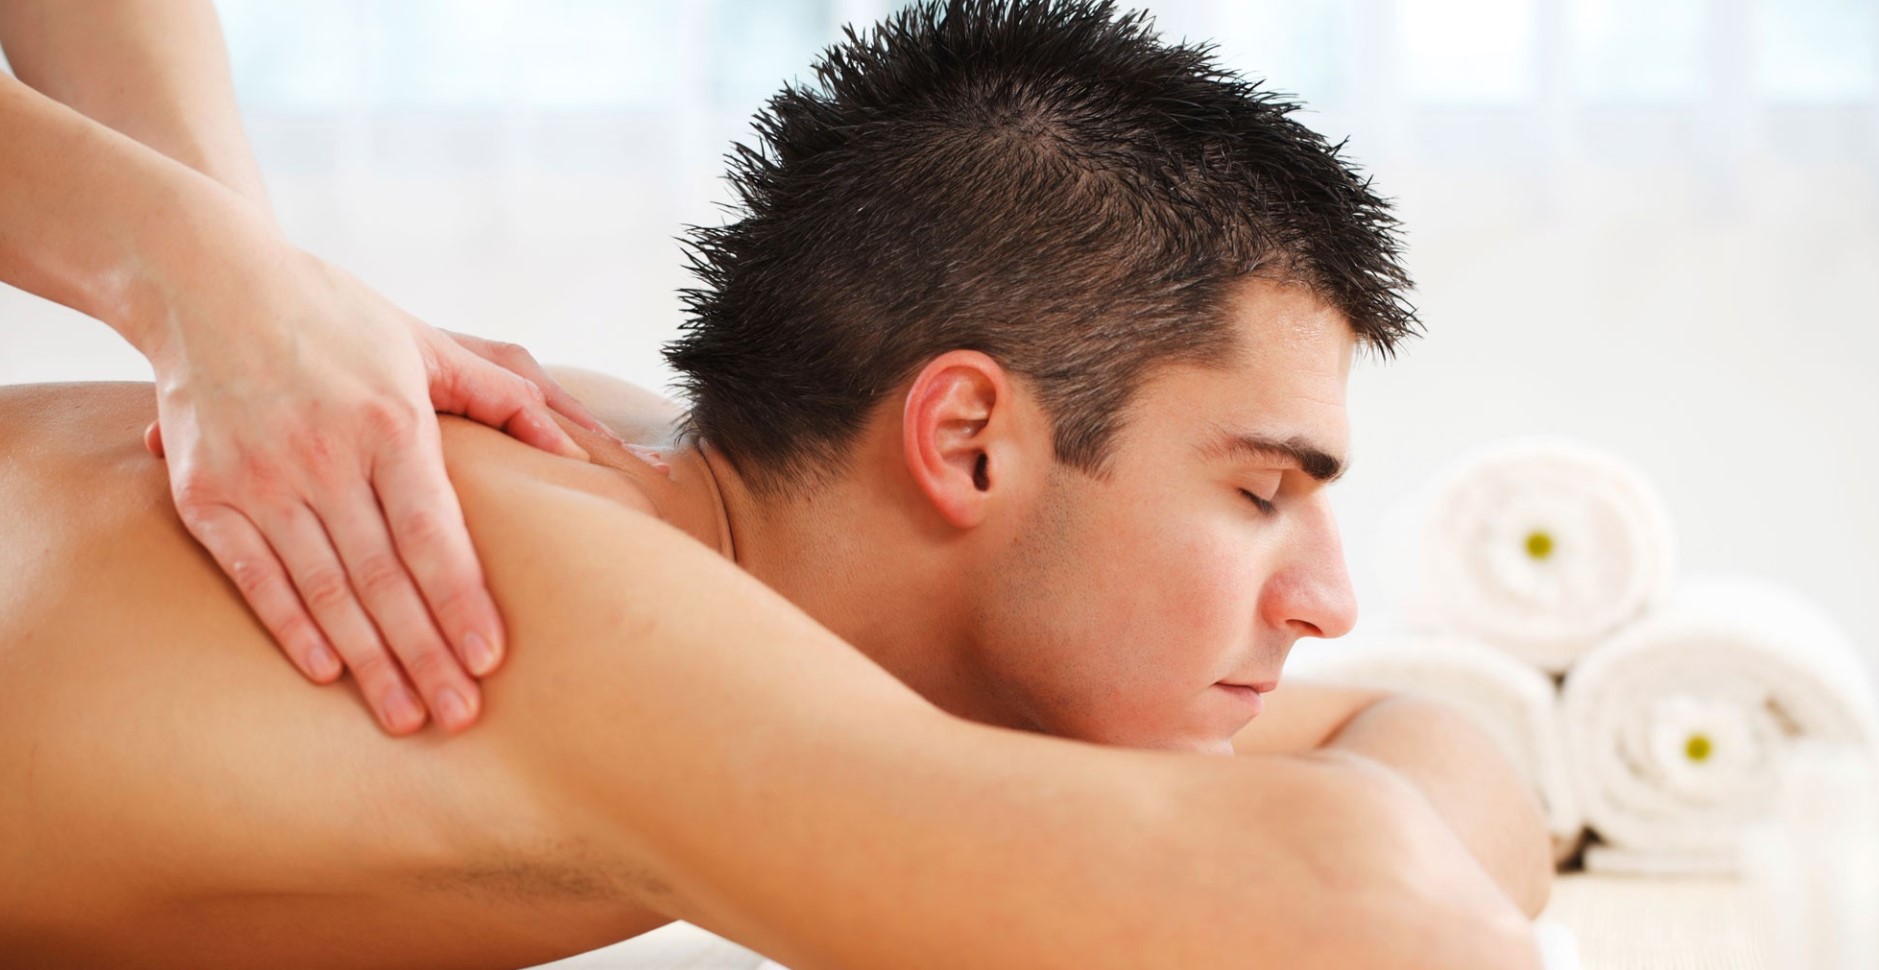 Sensual Massage: How It Can Improve Your Mental Health